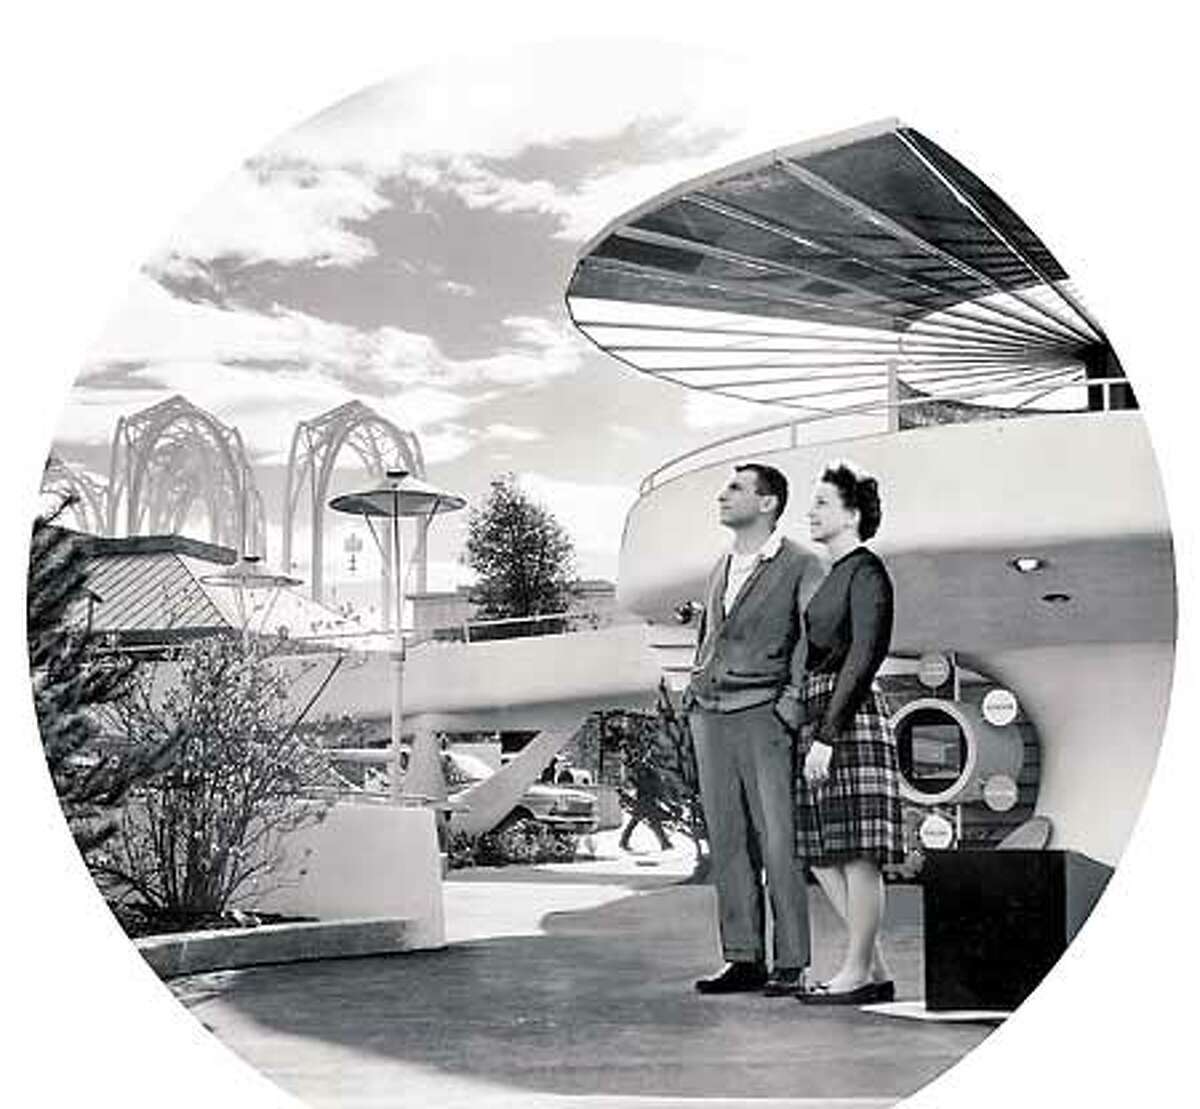 A vision of the "future" at the 1962 World's Fair in Seattle.